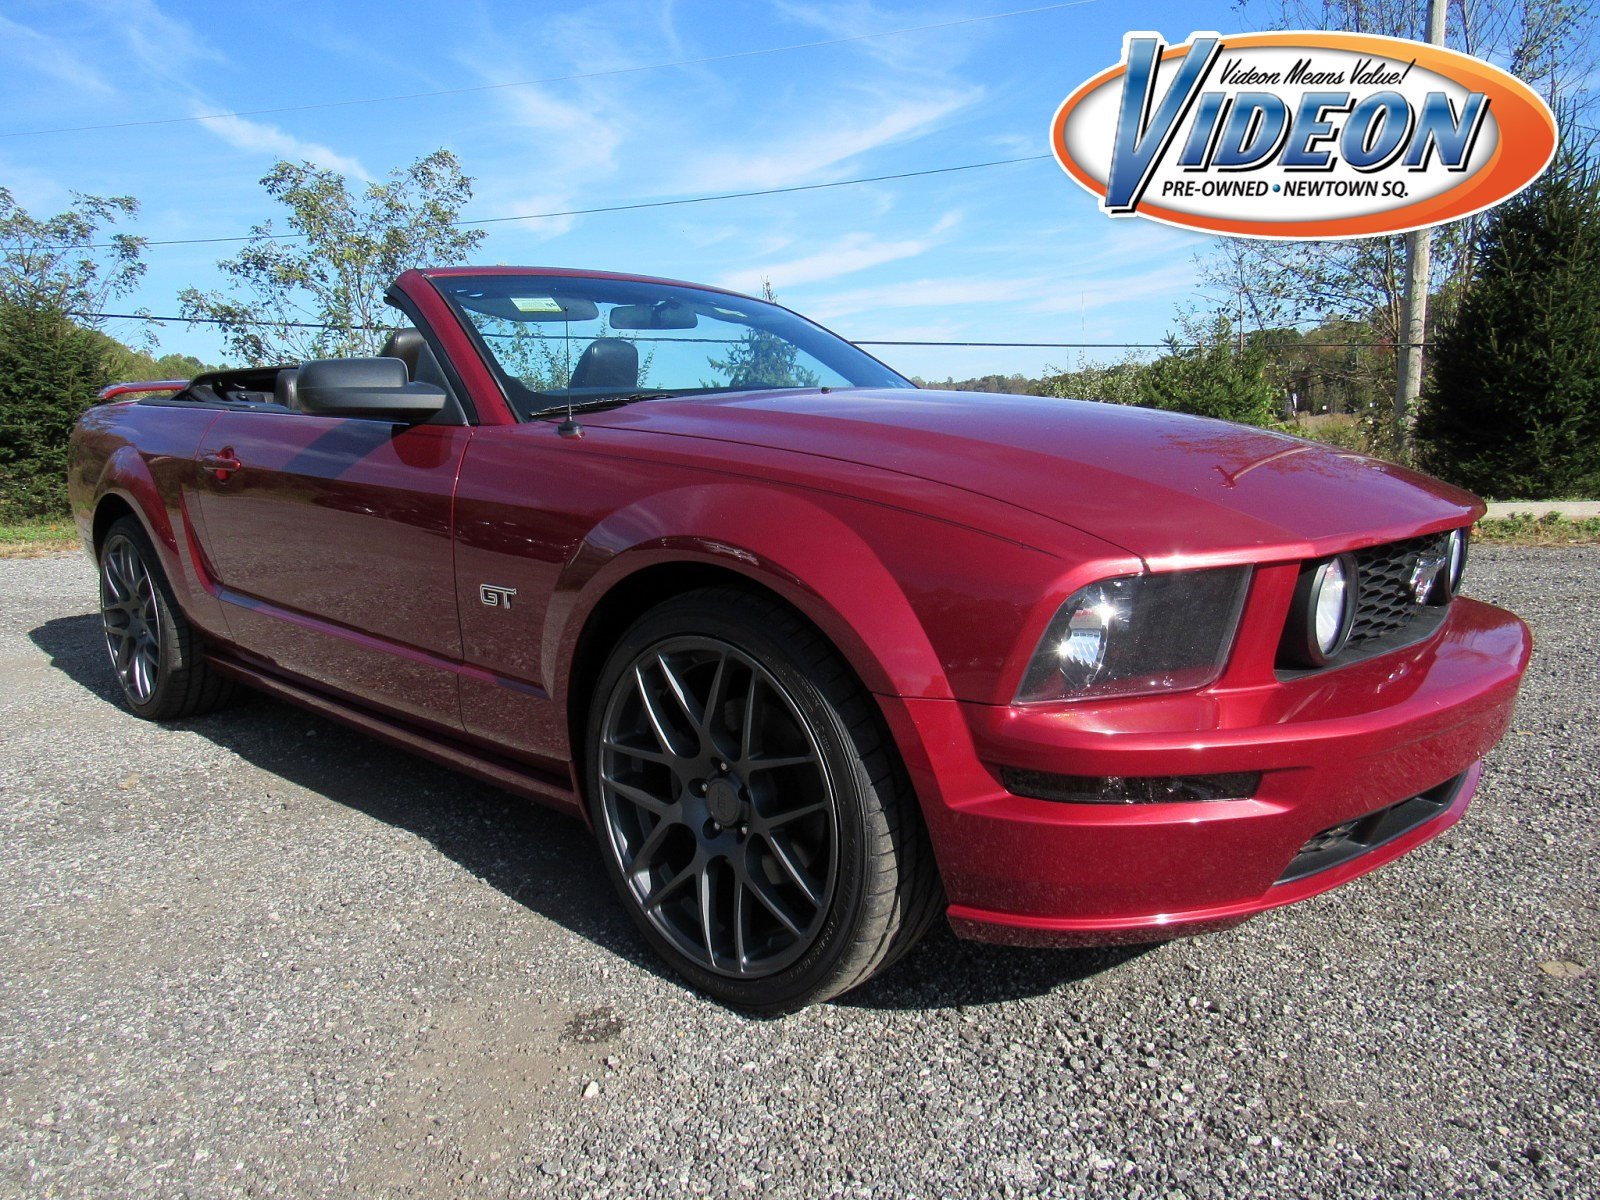 Pre Owned 2006 Ford Mustang Gt Premium Rwd Convertible